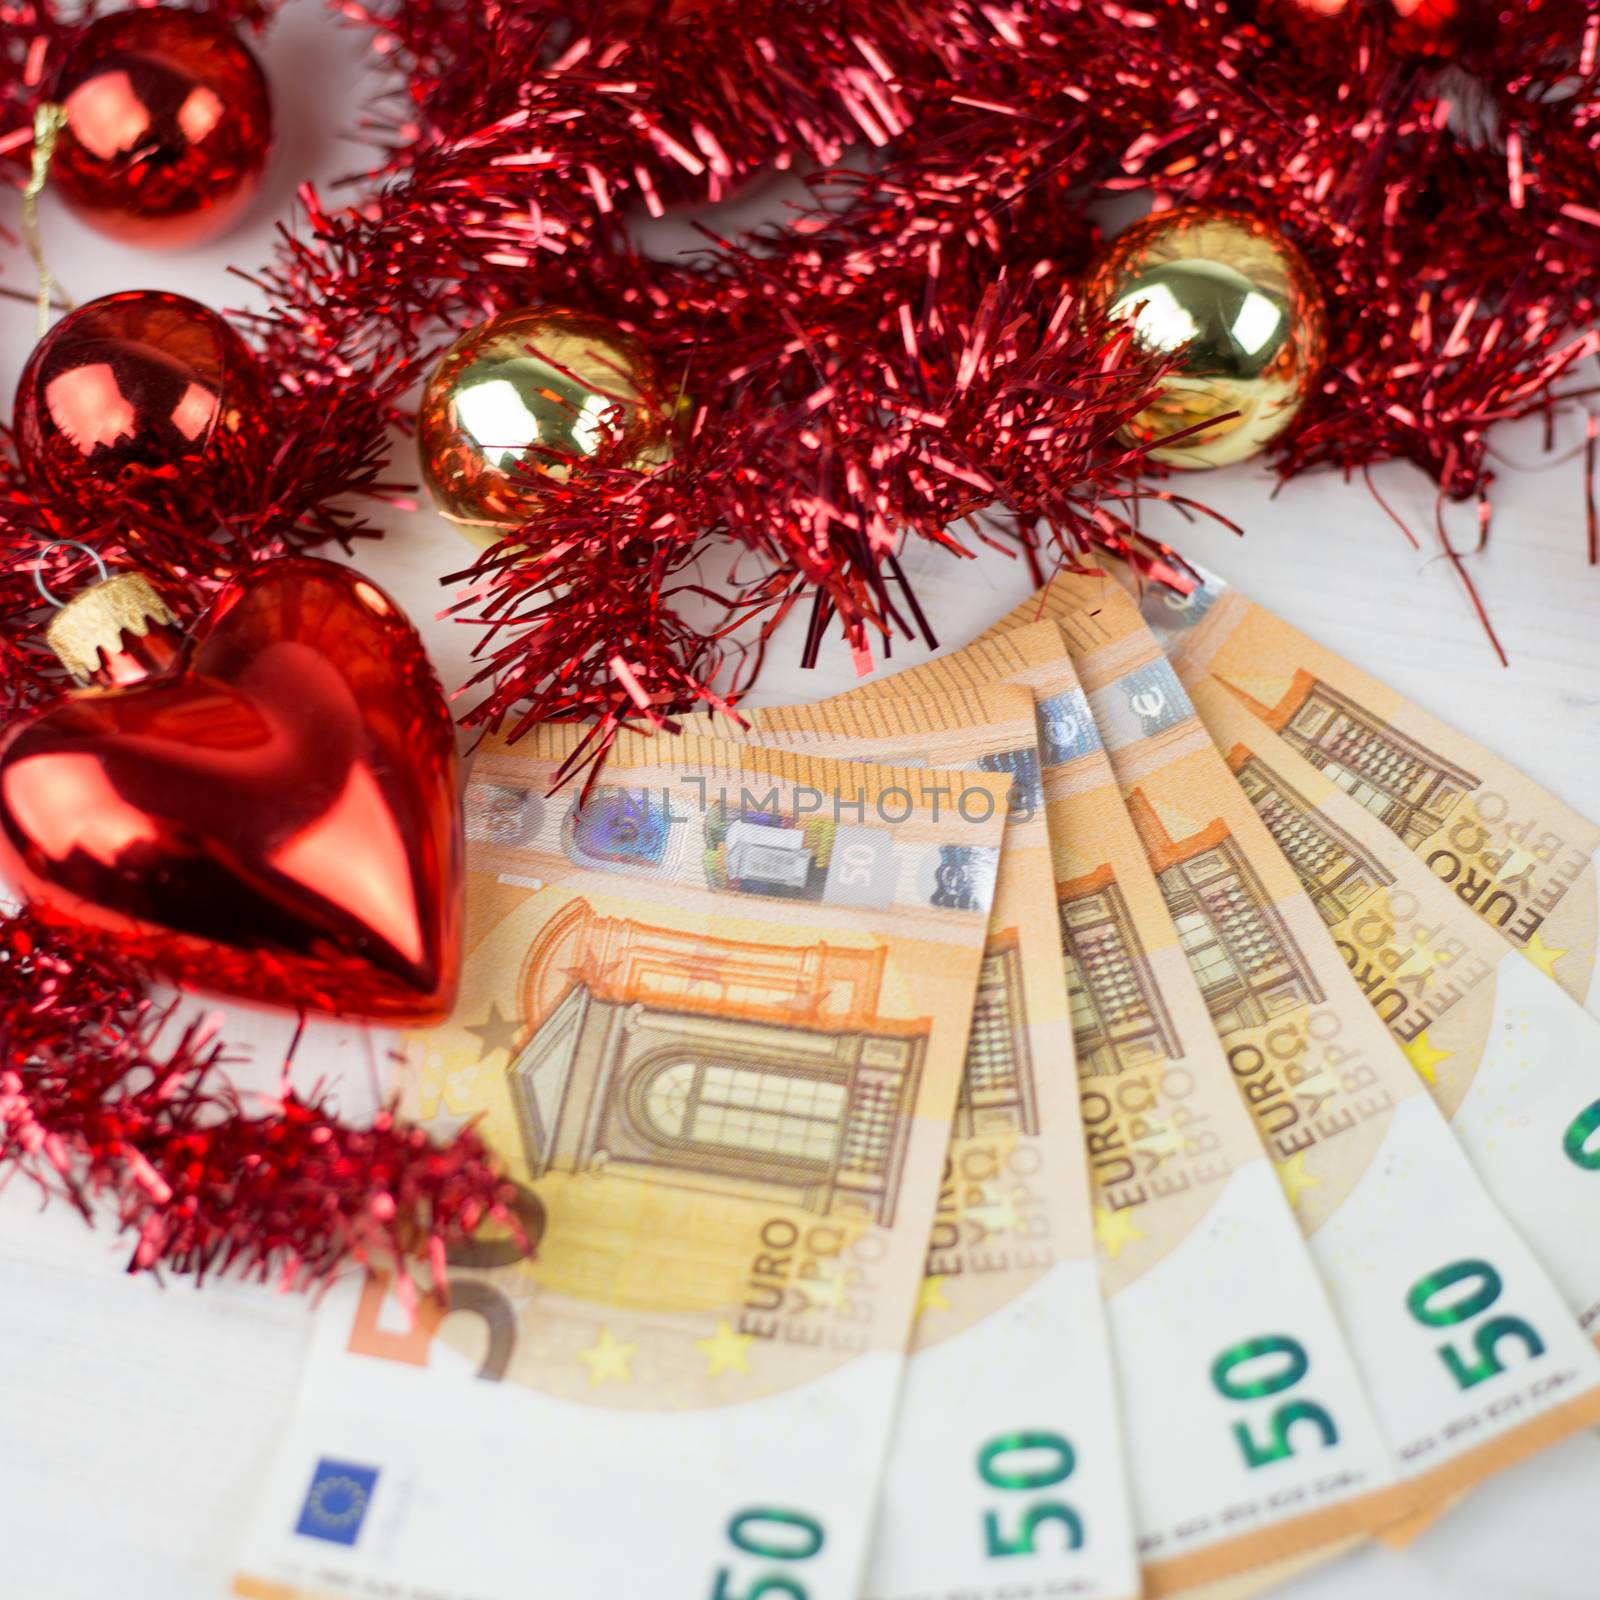 Christmas money business concept: some fifty euro banknotes with red and gold baubles and wreath decoration on light wooden table